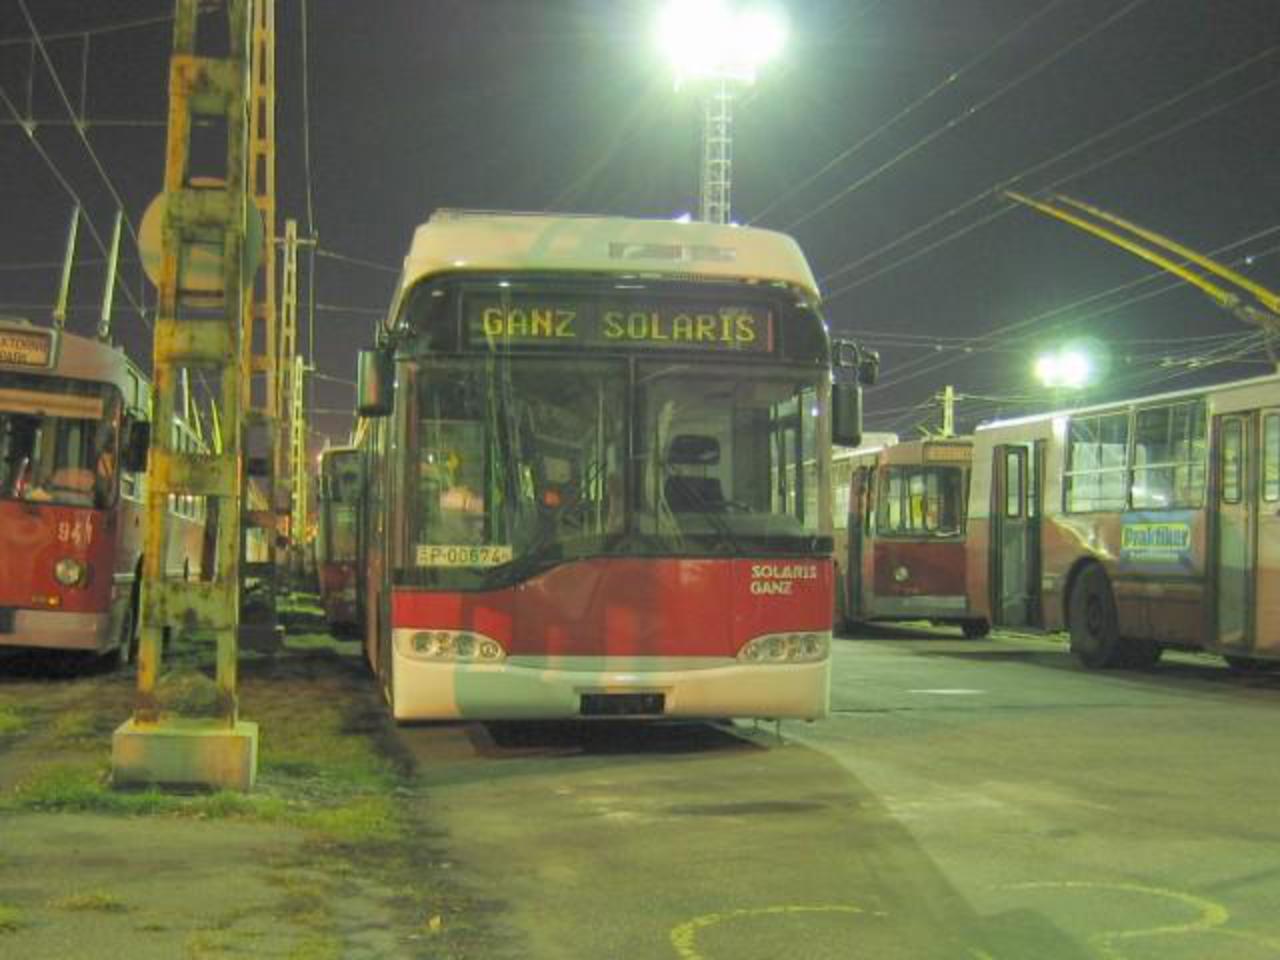 Solaris Trolley-bus Photo Gallery: Photo #11 out of 11, Image Size ...